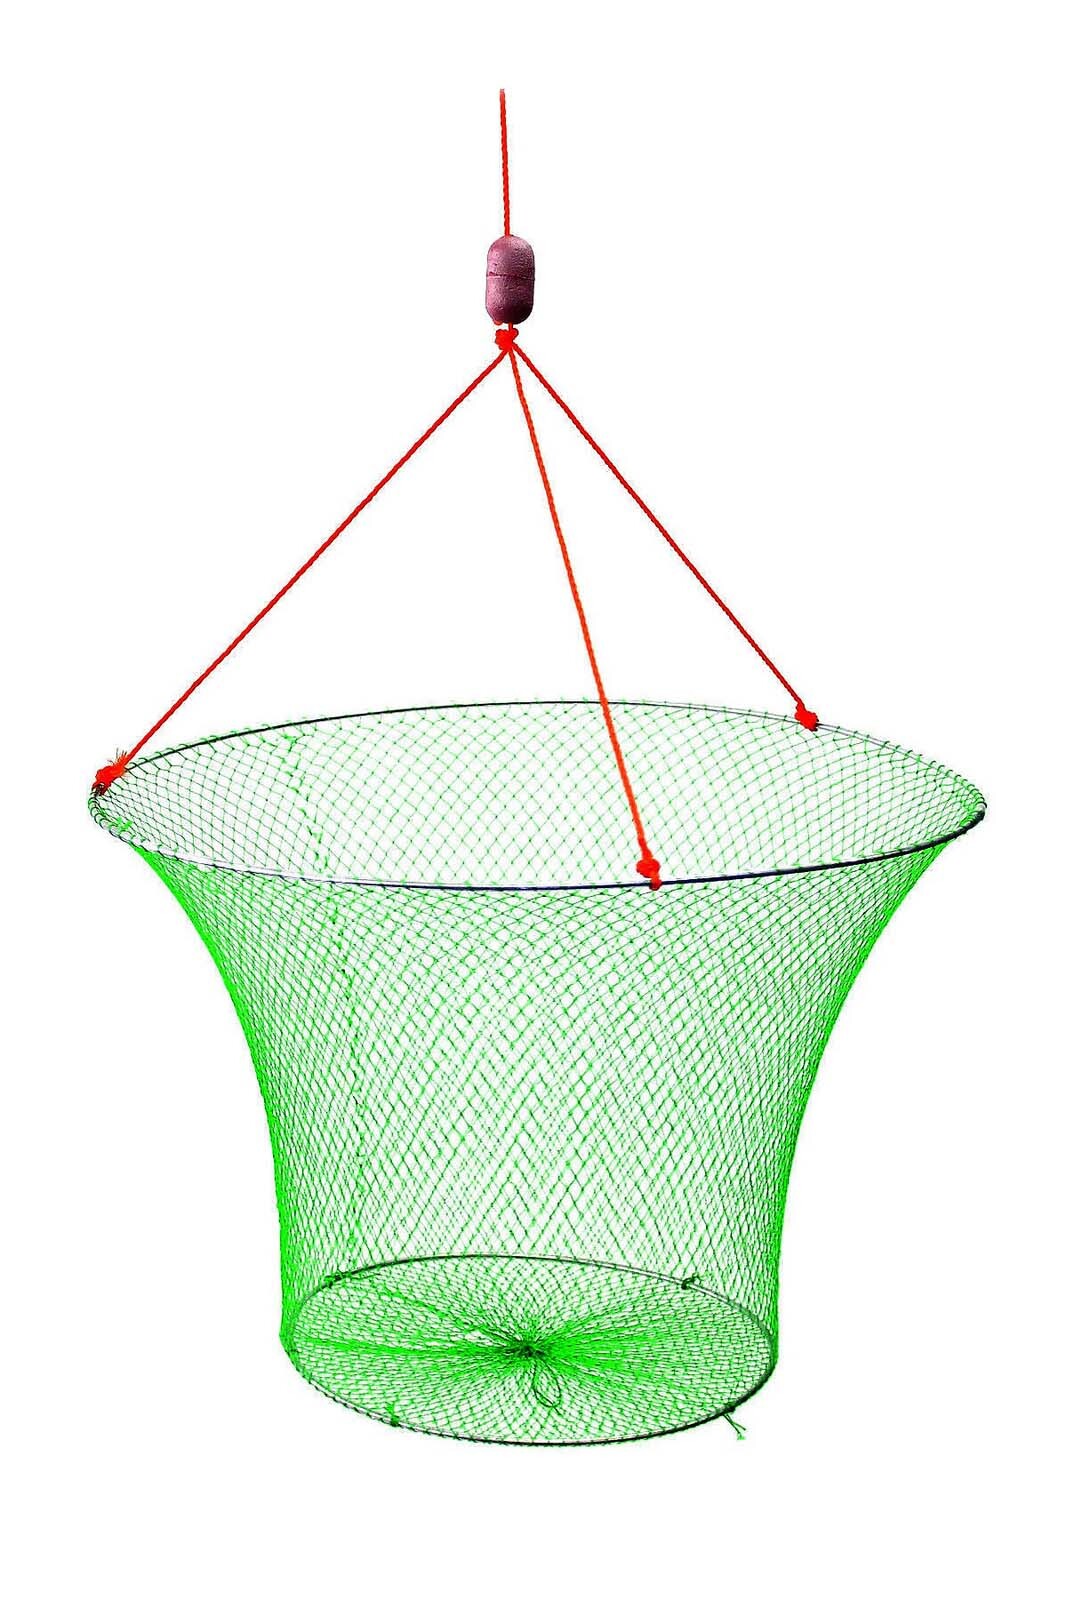 Seahorse Double Ring Yabbie Net With 3/4 Inch Mesh - Drop Net - Red Claw  Trap